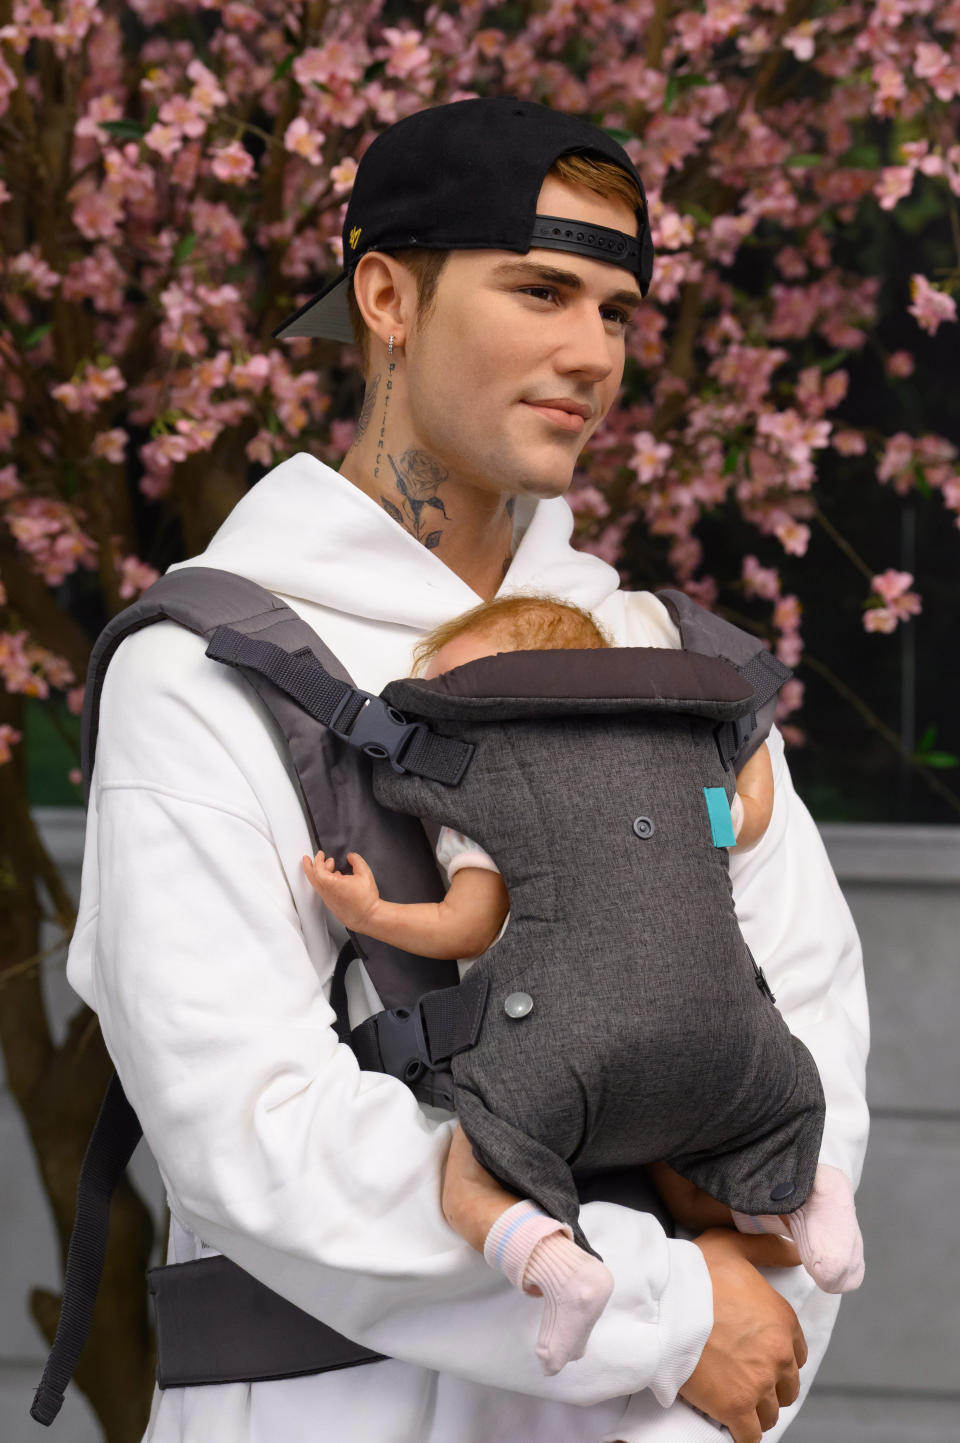 Caption: Baby, Baby, Baby, Oh! In celebration of Justin and Hailey Bieber's baby news Madame Tussauds London has dressed the dad-to-be with a baby carrier to help him get some all-important practice in ahead of the big arrival. Fans of the 'Baby' superstar can see the figure at the Baker Street attraction.